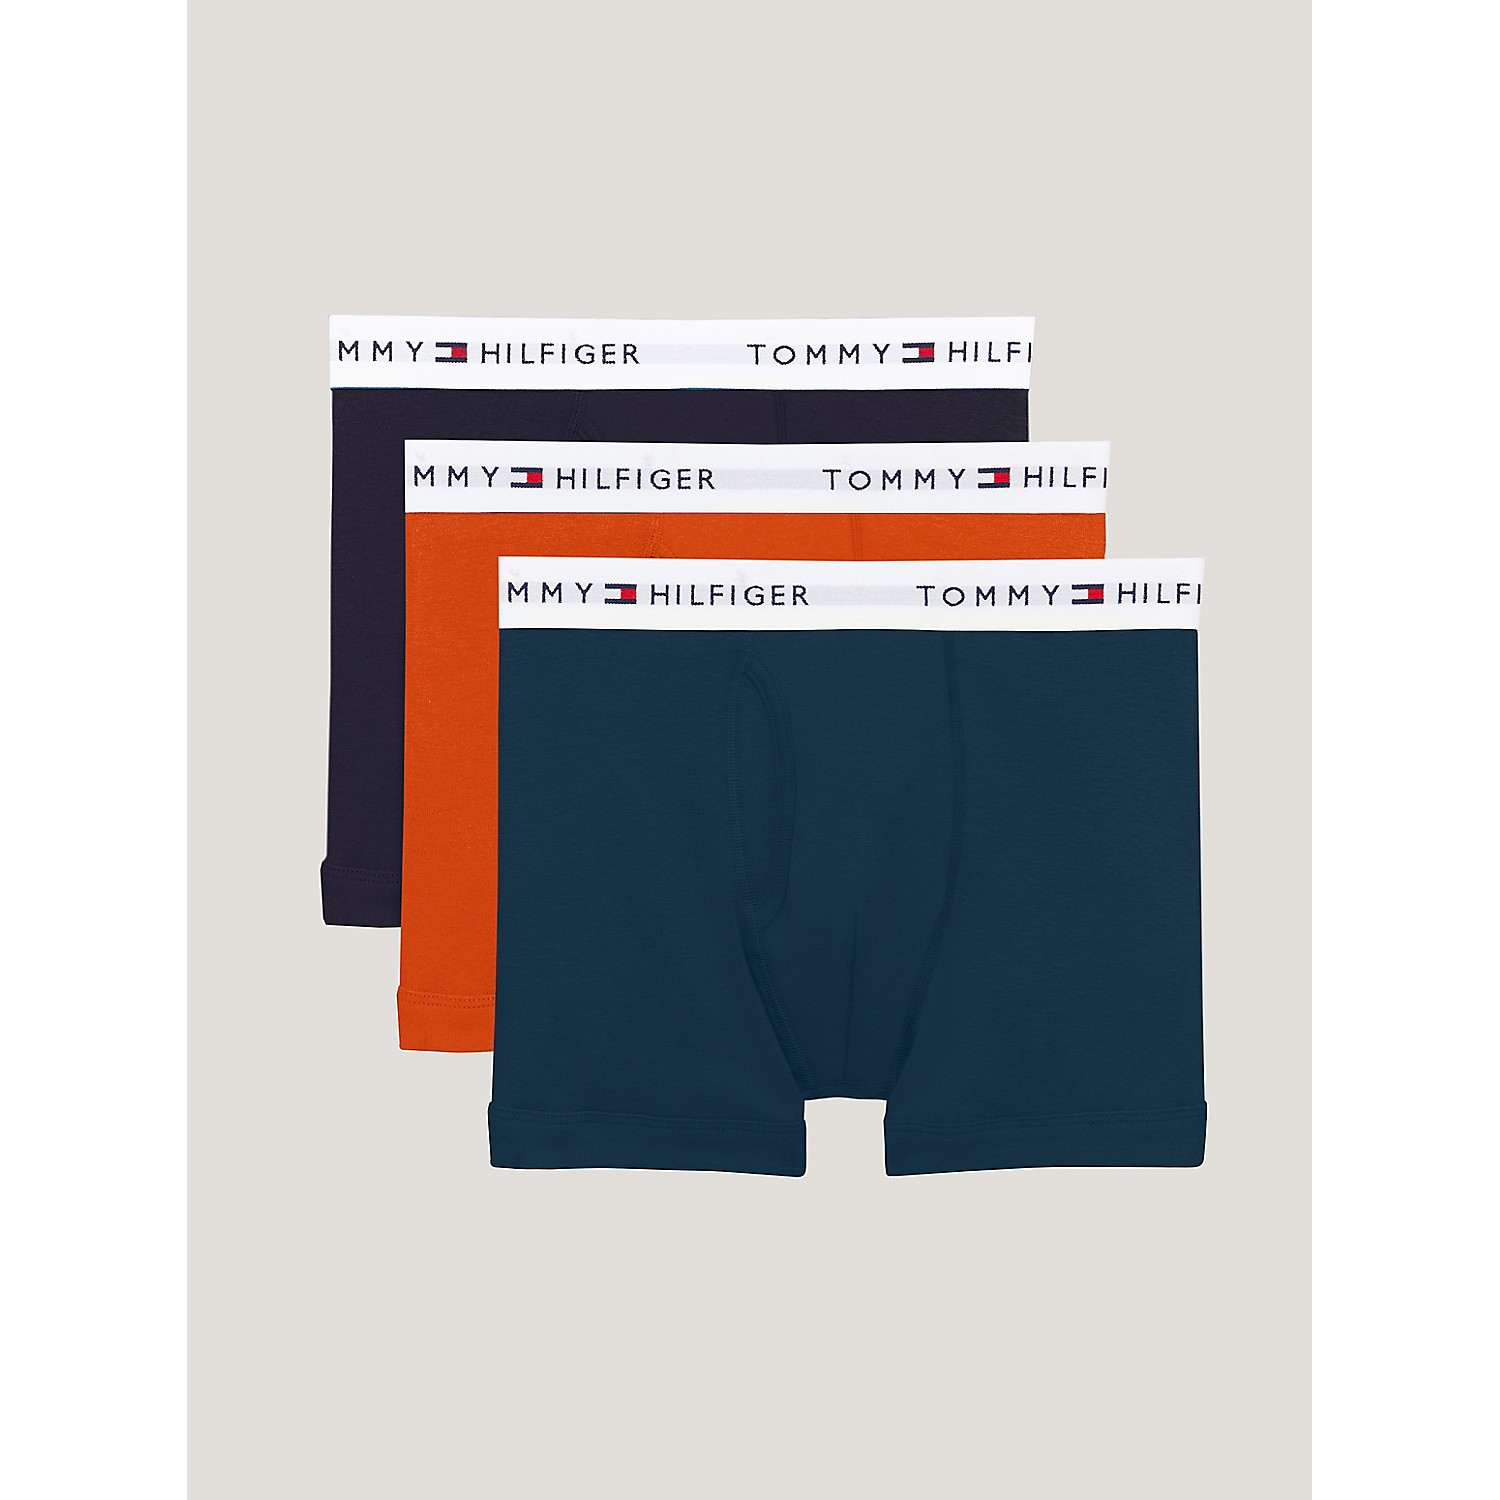 TOMMY HILFIGER Cotton Classics Trunk 3-Pack